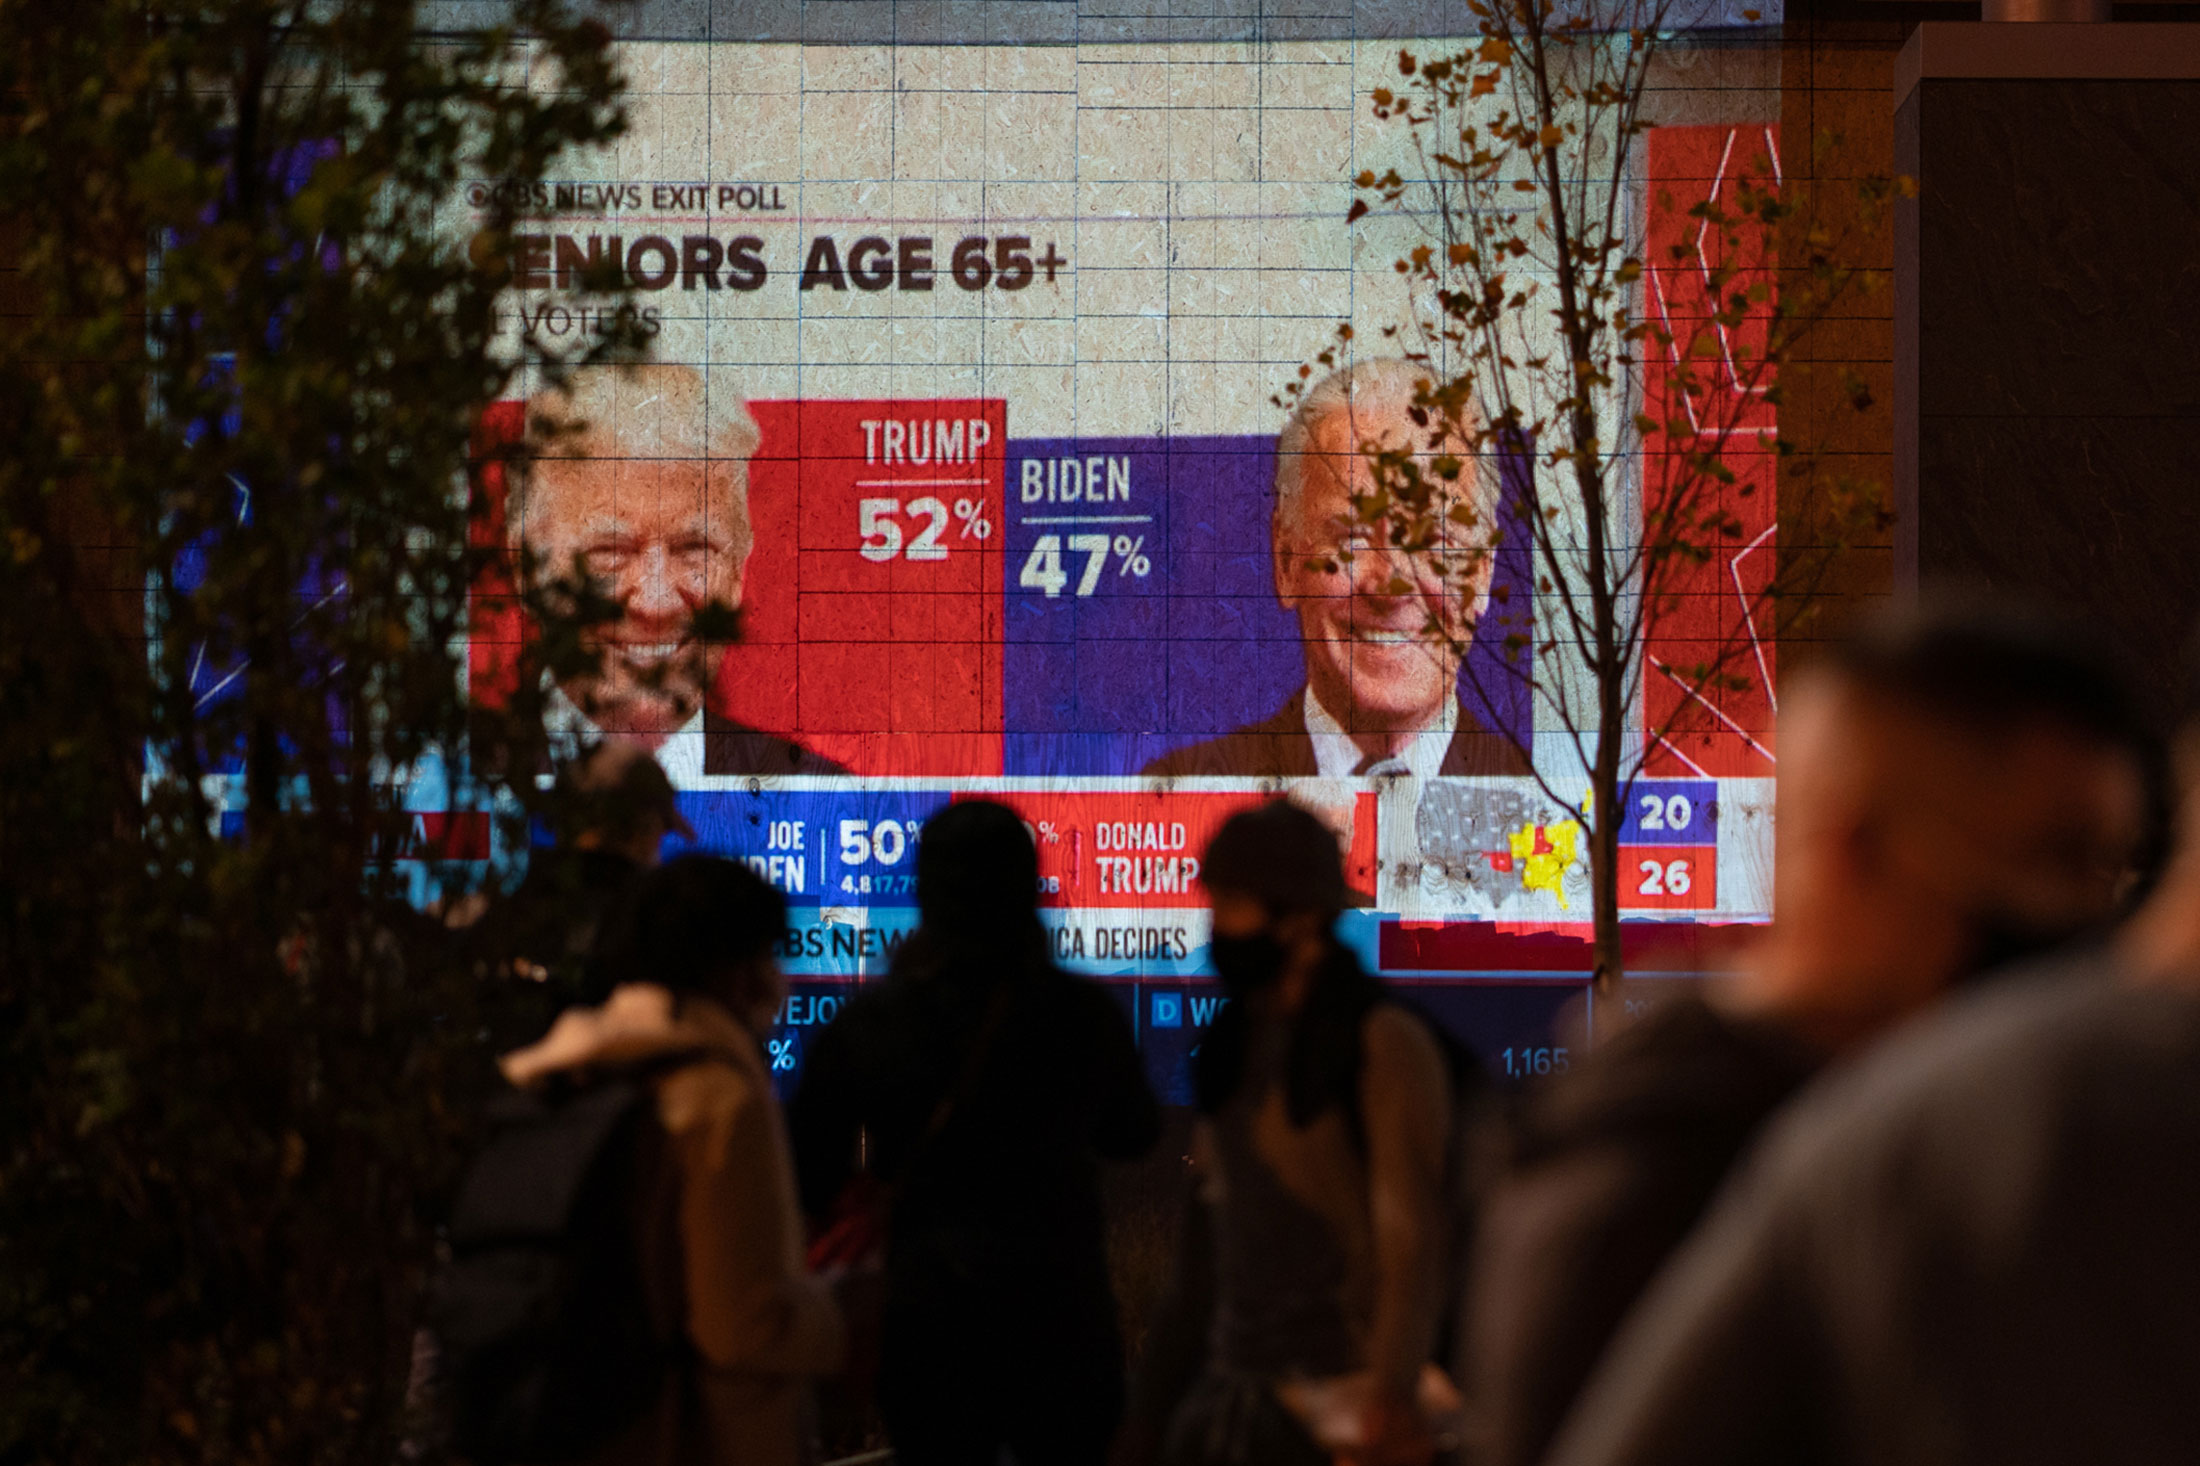 People watch&nbsp;election returns projected on a building in Washington, D.C., on Nov. 3.